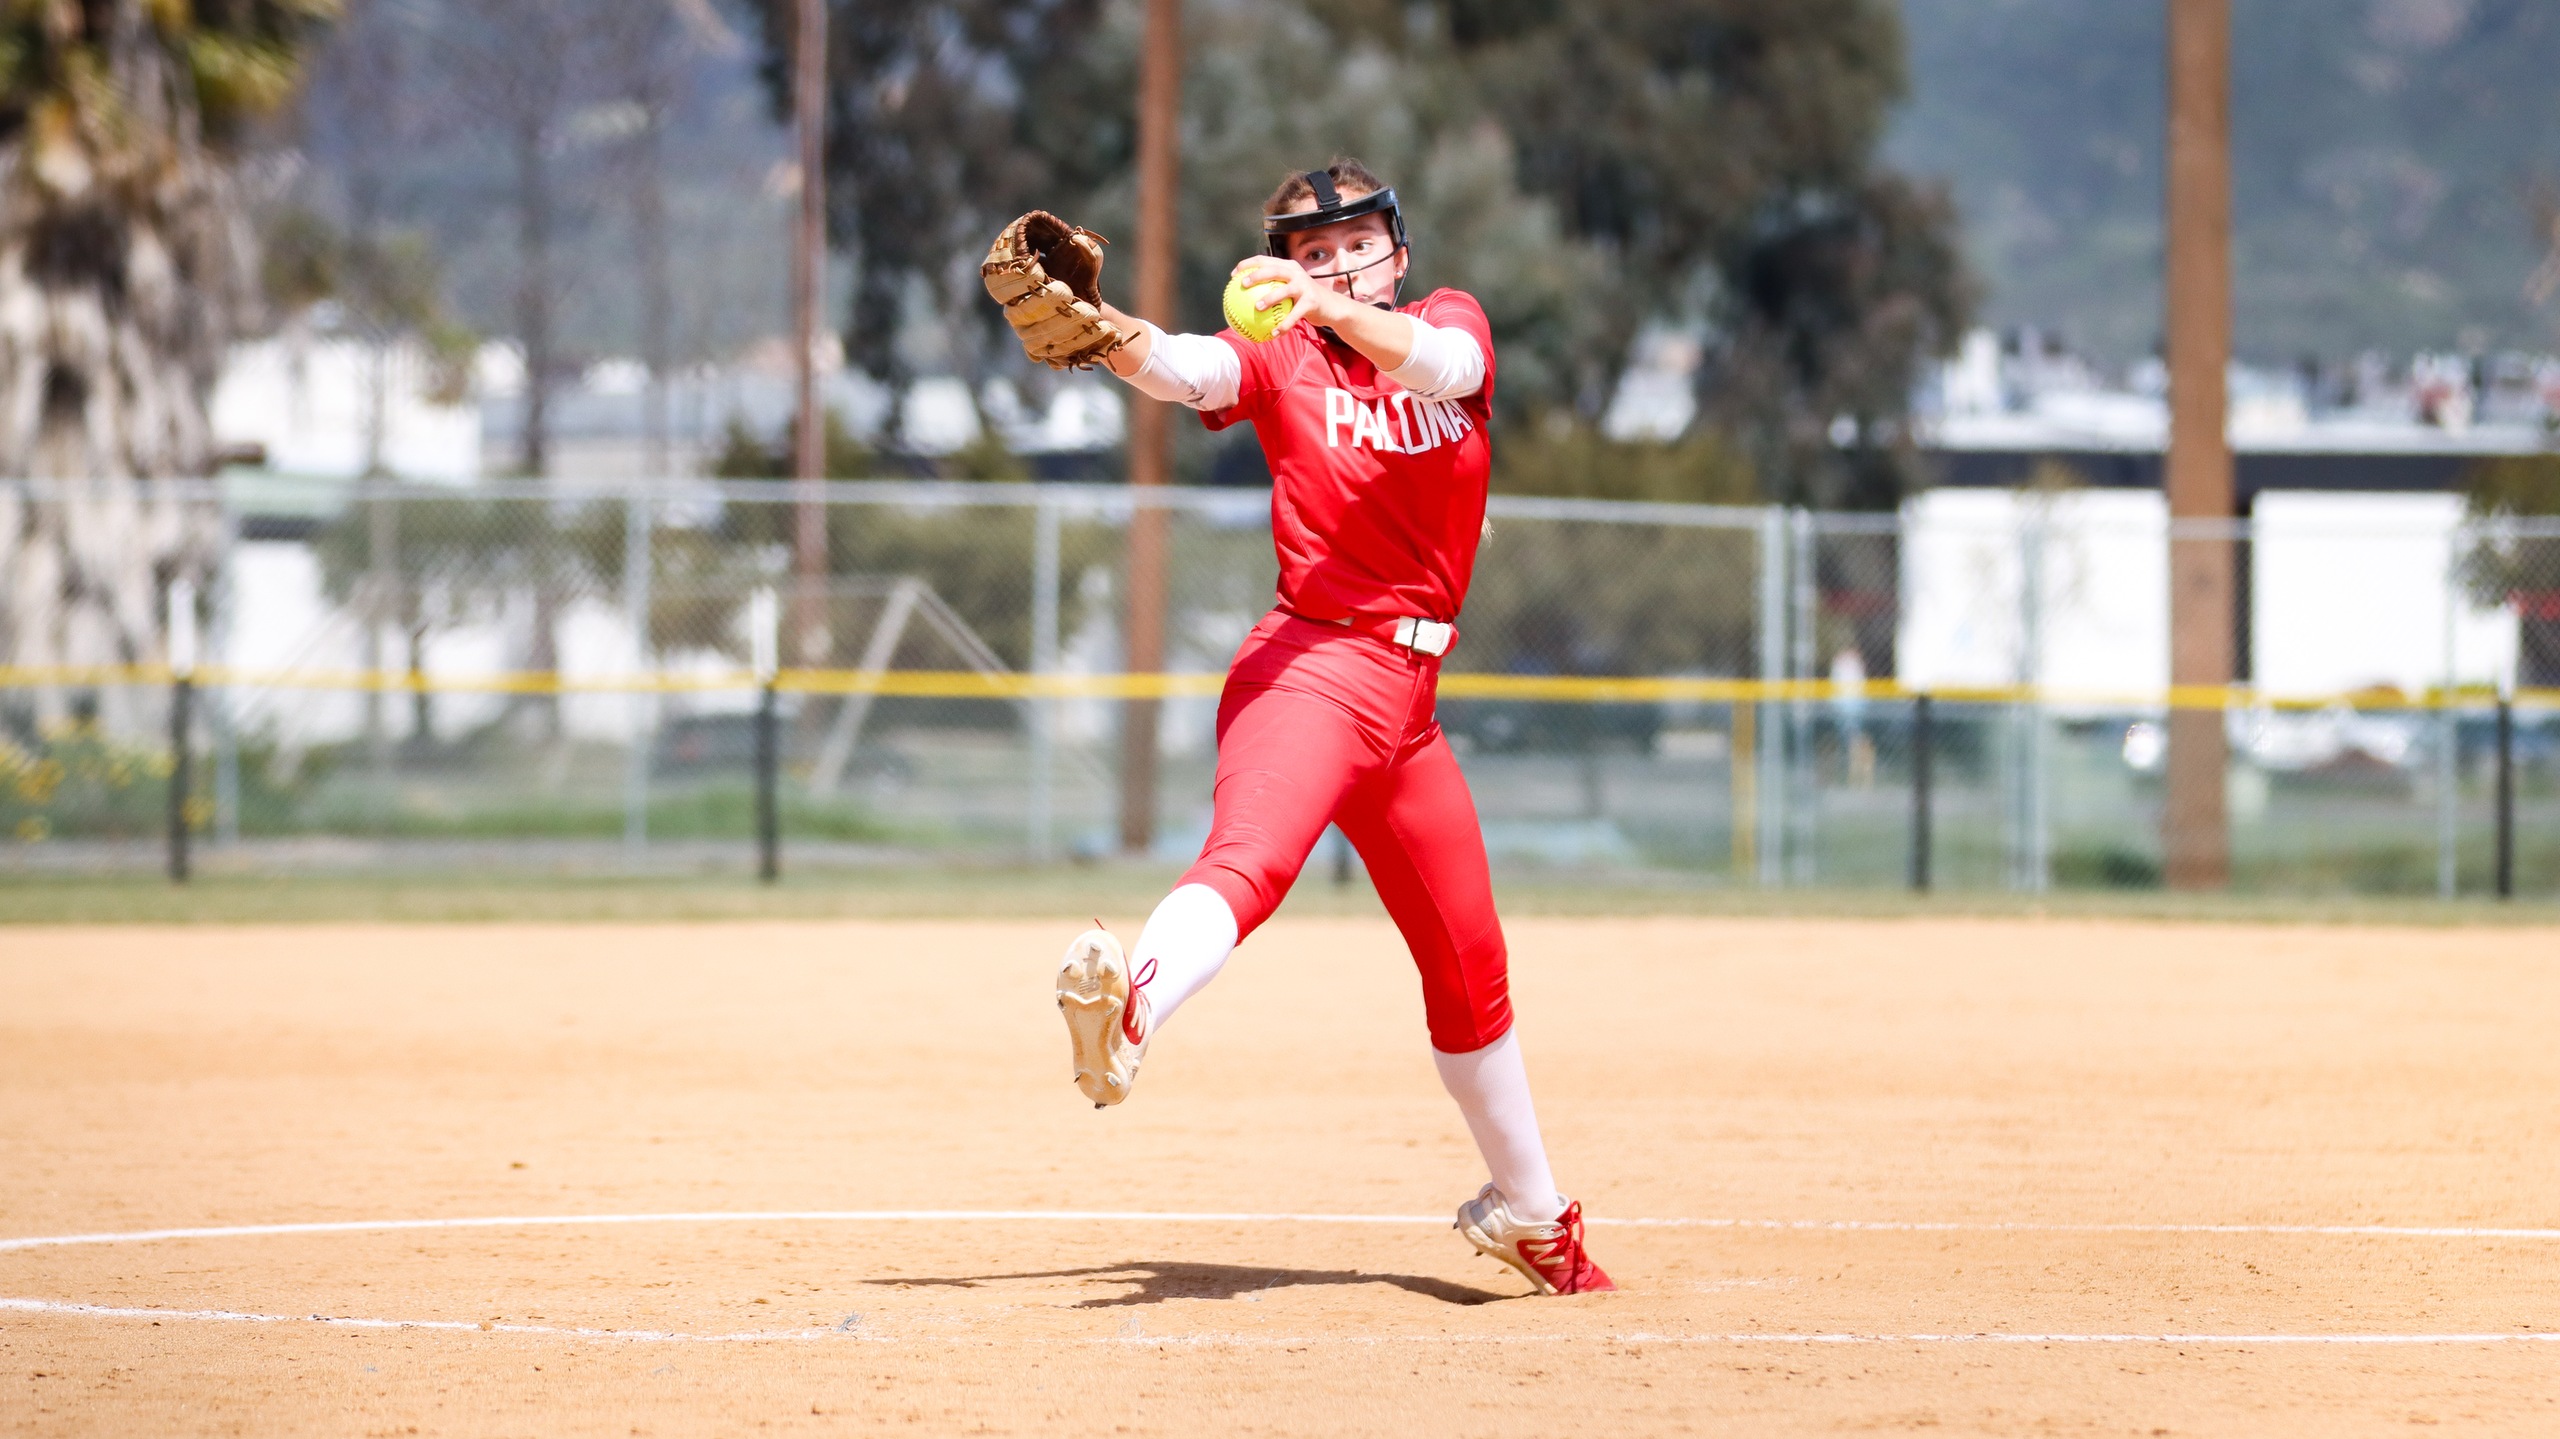 Maddie Bedolla pitched the fifth inning for the Comets and struck out one batter. Photo by Cara Heise.